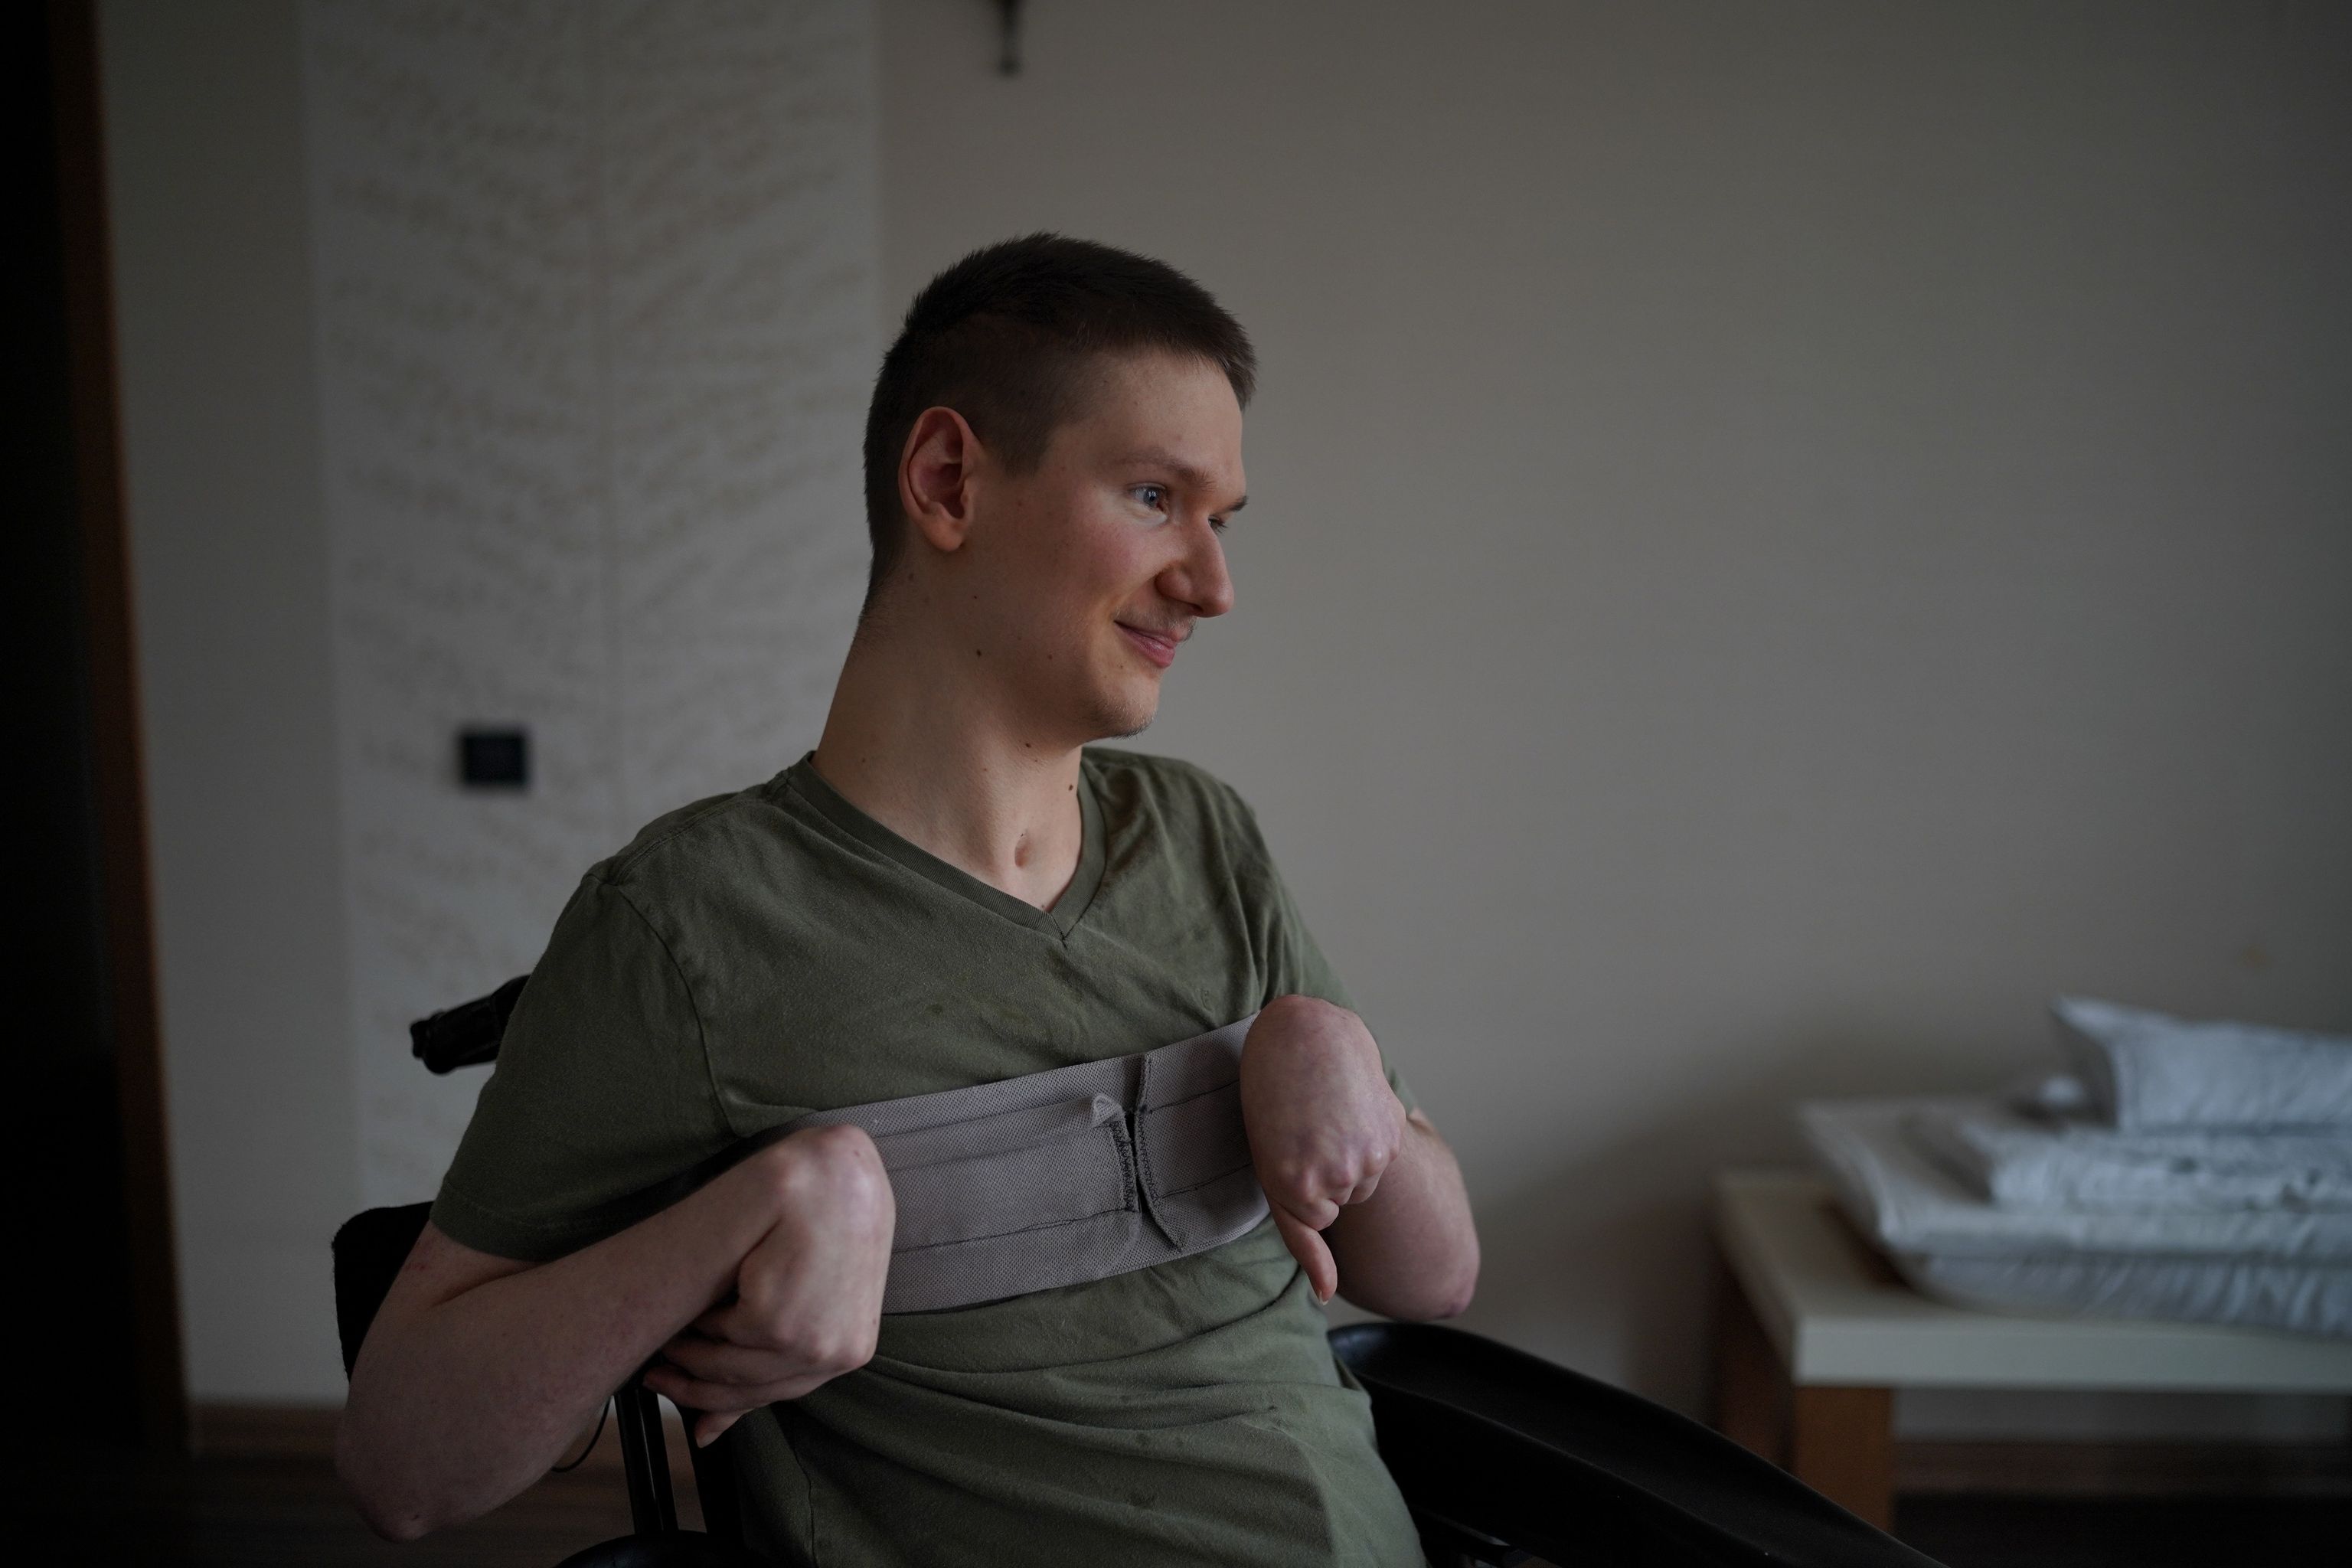 Harder than ever: How power outages affect people with disabilities in Ukraine